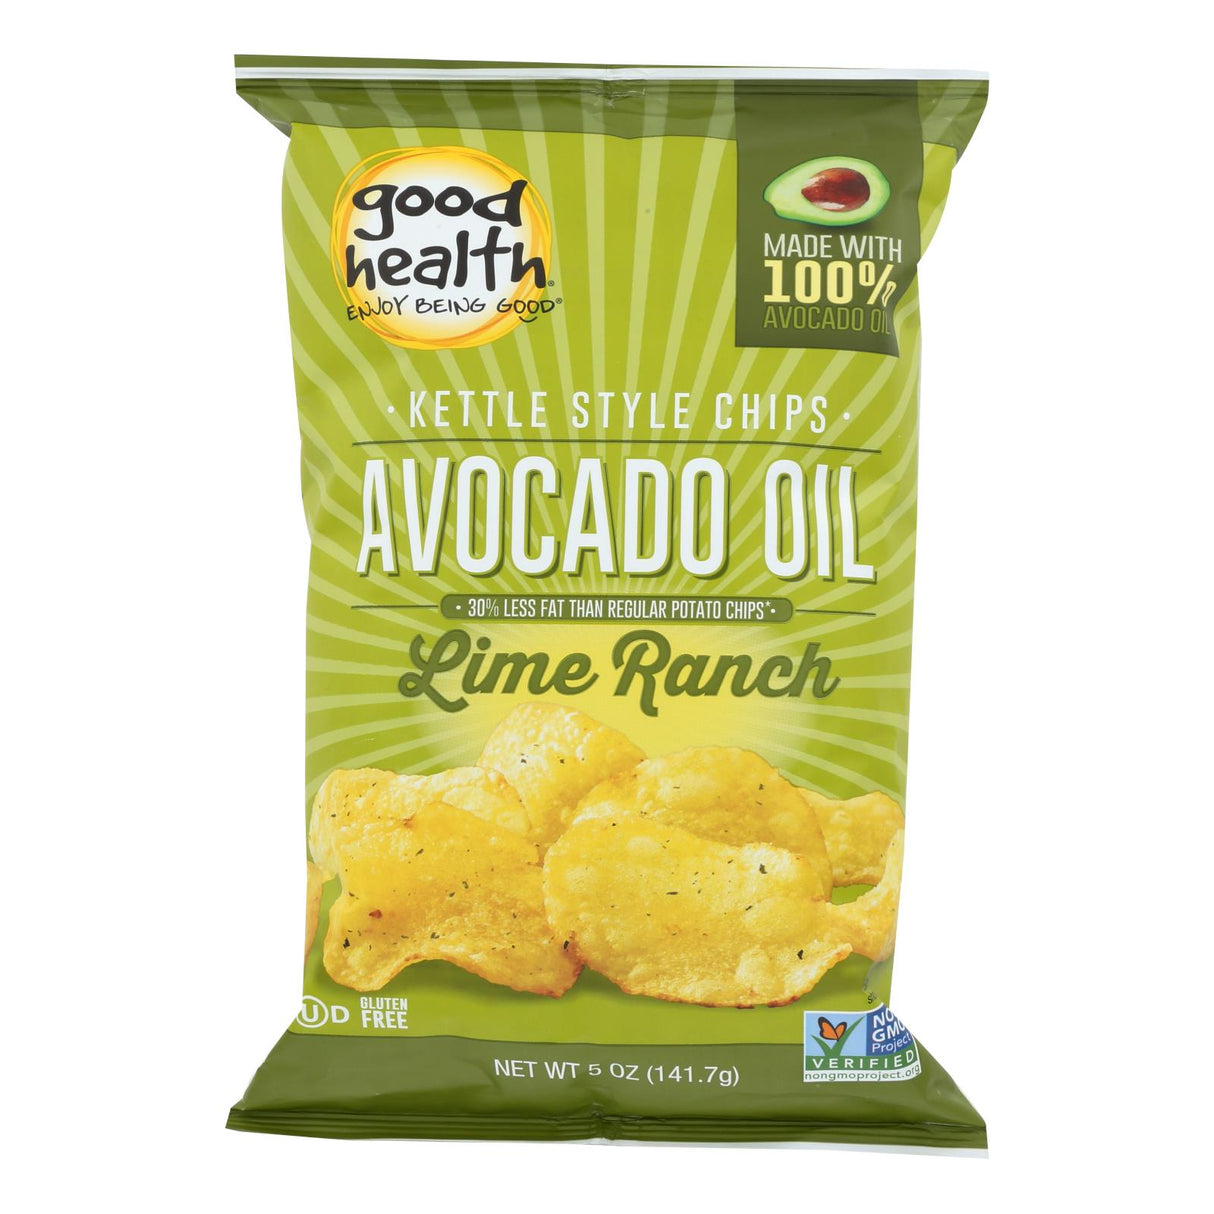 Good Health Kettle Chips - Avocado Oil Lime Ranch - Case Of 12 - 5 Oz.